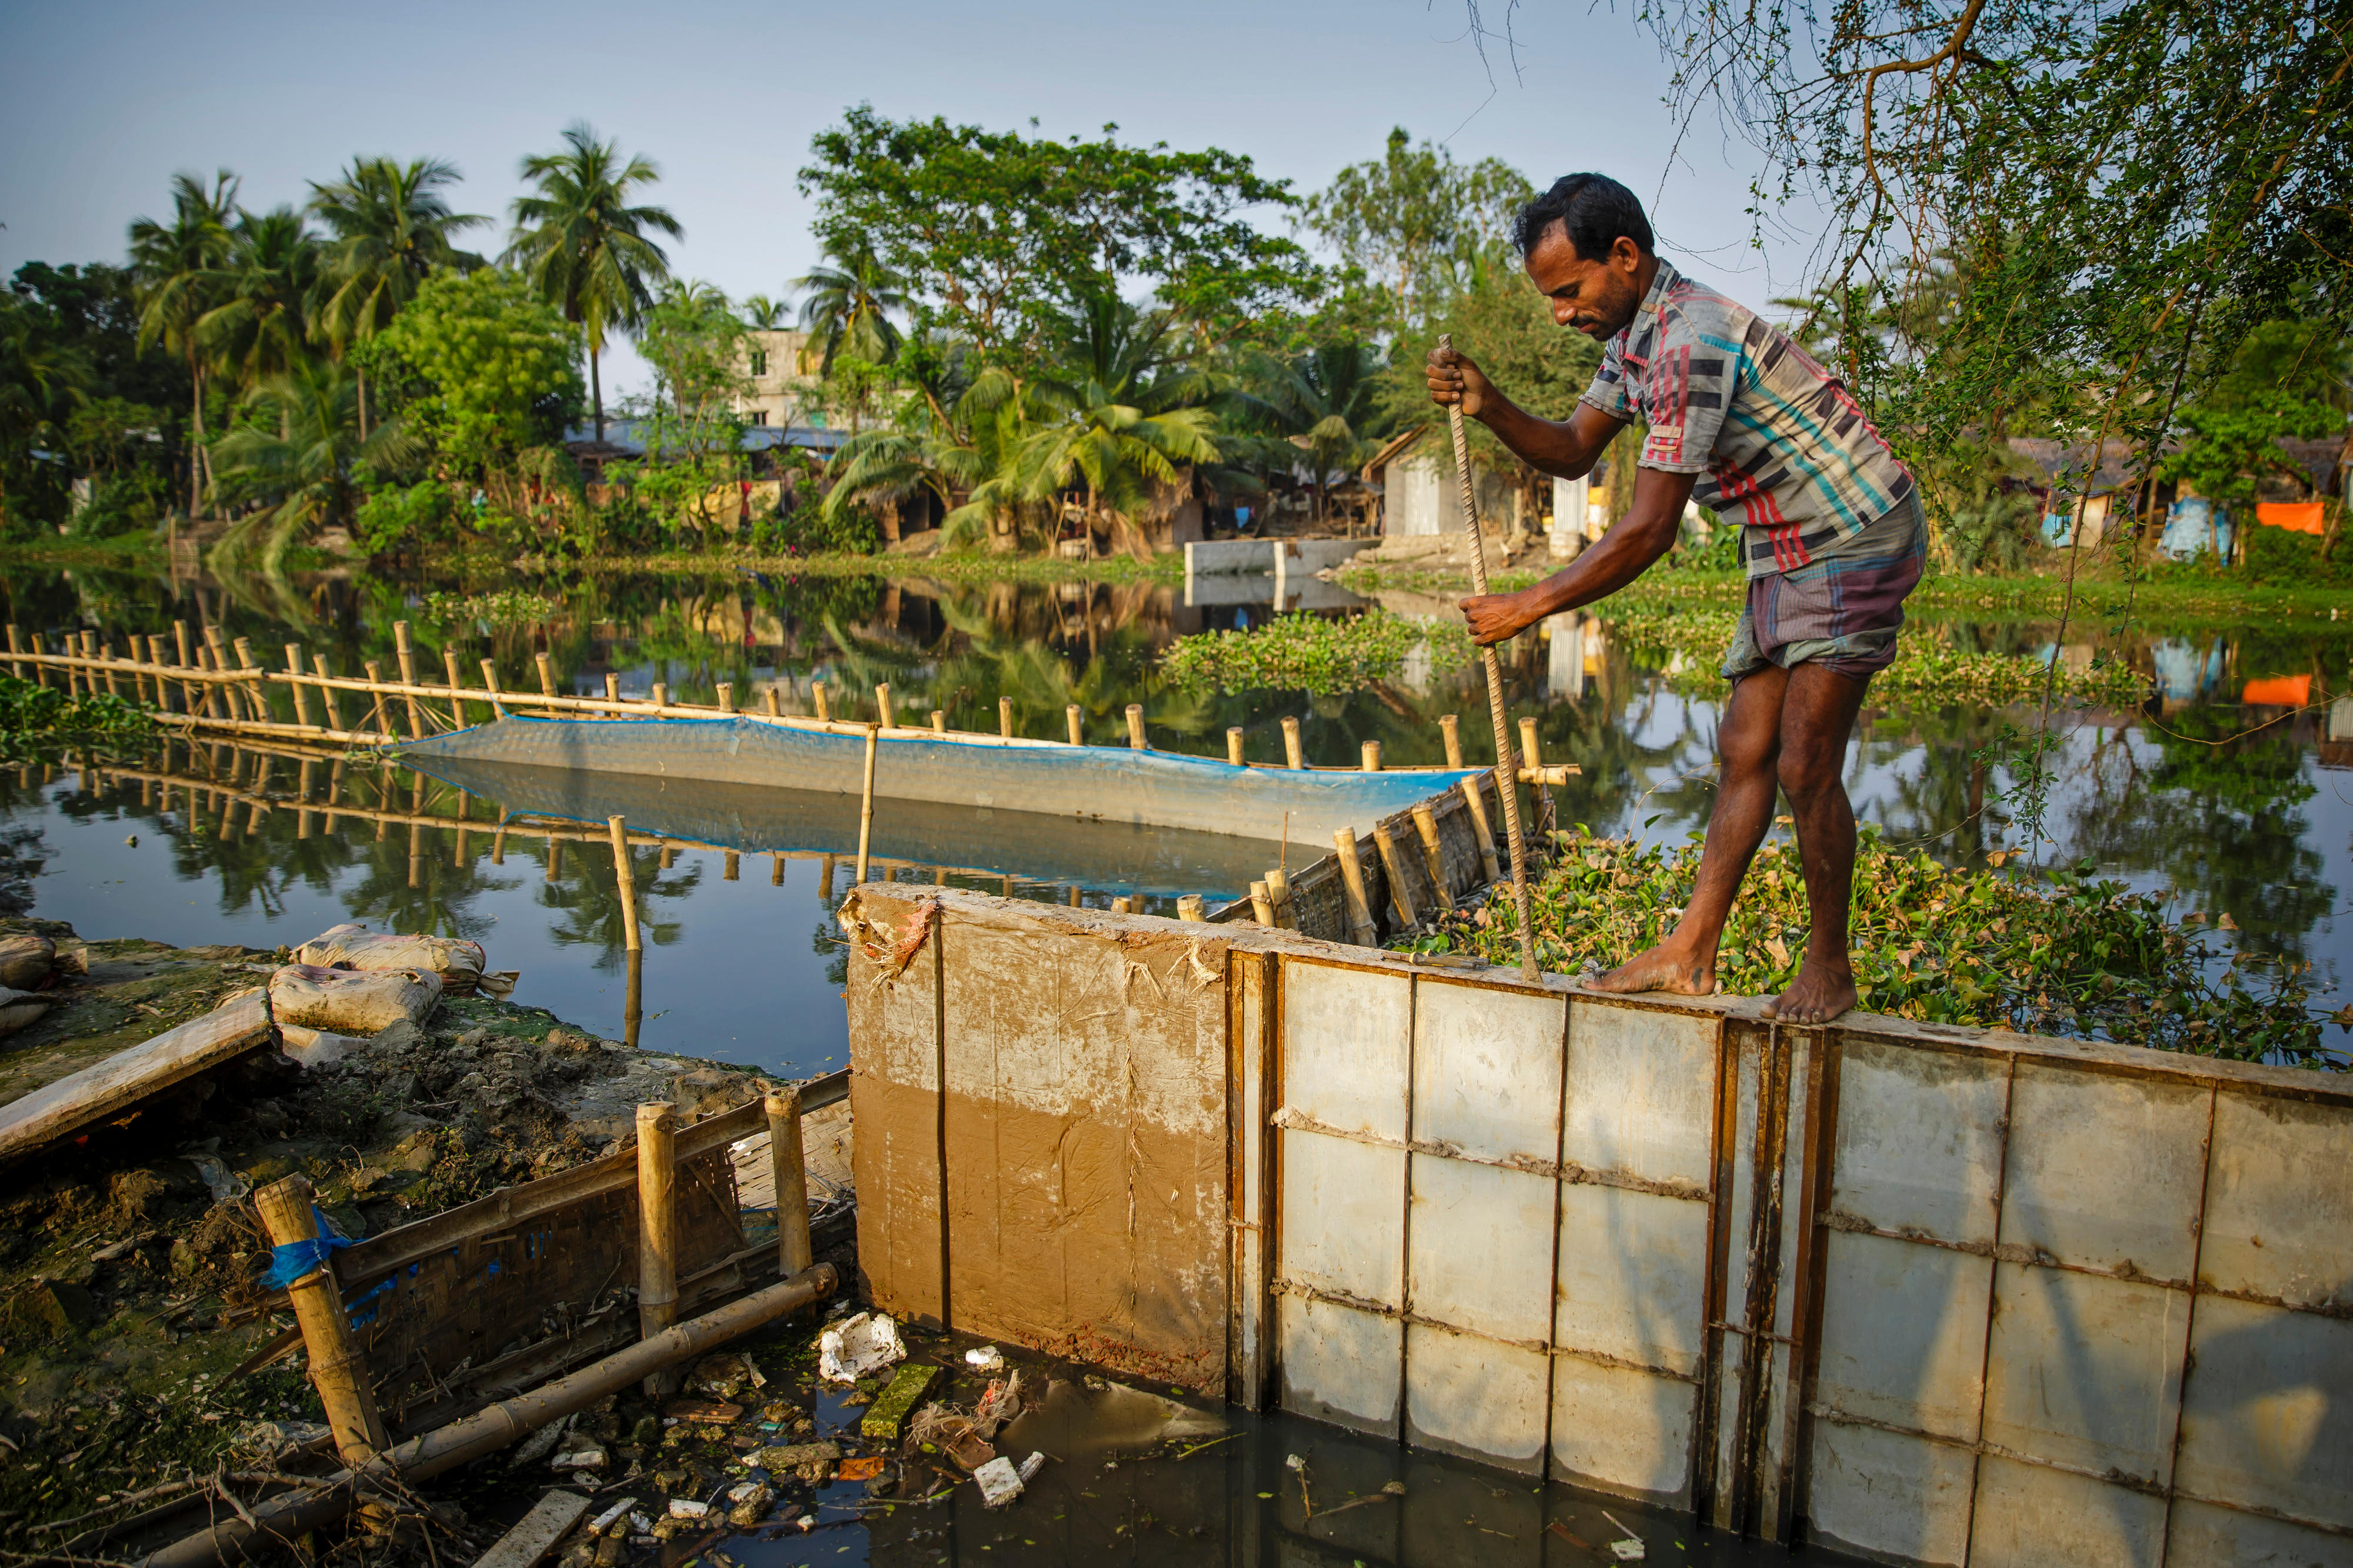 Construction of a bank stabilisation on the banks of the Mayur River in the city of Khulna in south-western Bangladesh